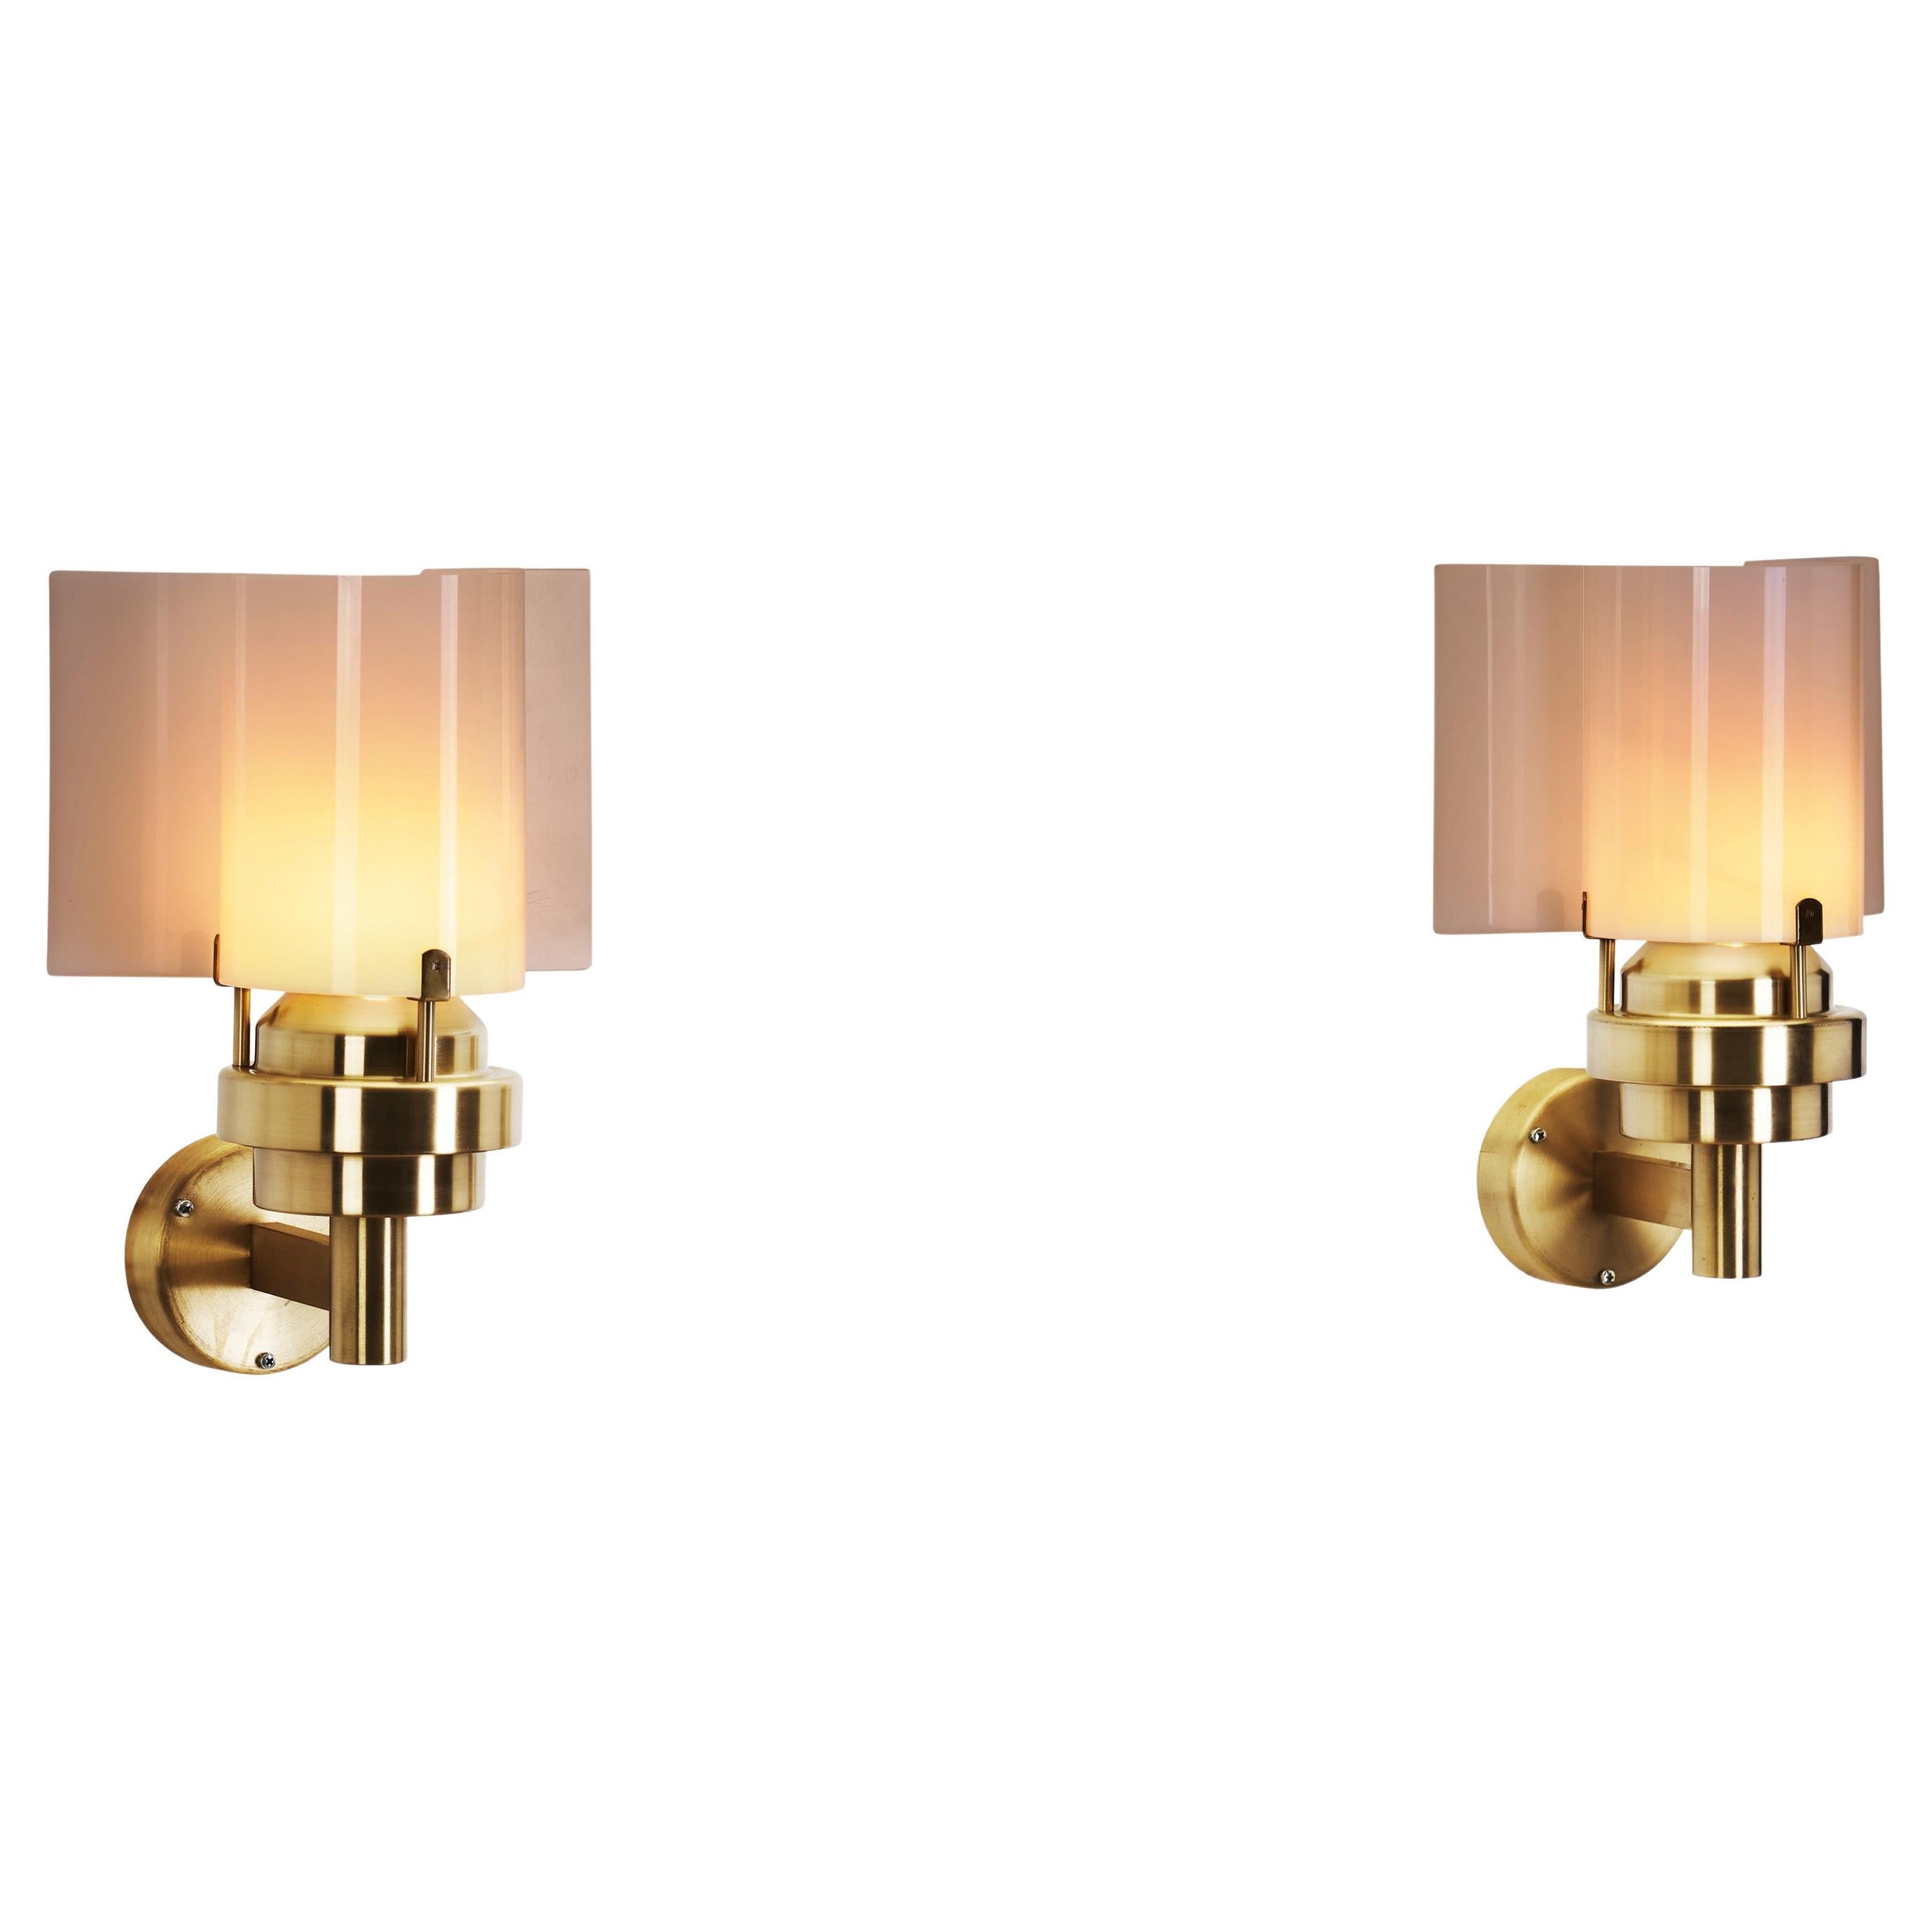 Brass and Acrylic Glass Wall Lamps by Stockmann Orno, Finland 1960s For Sale